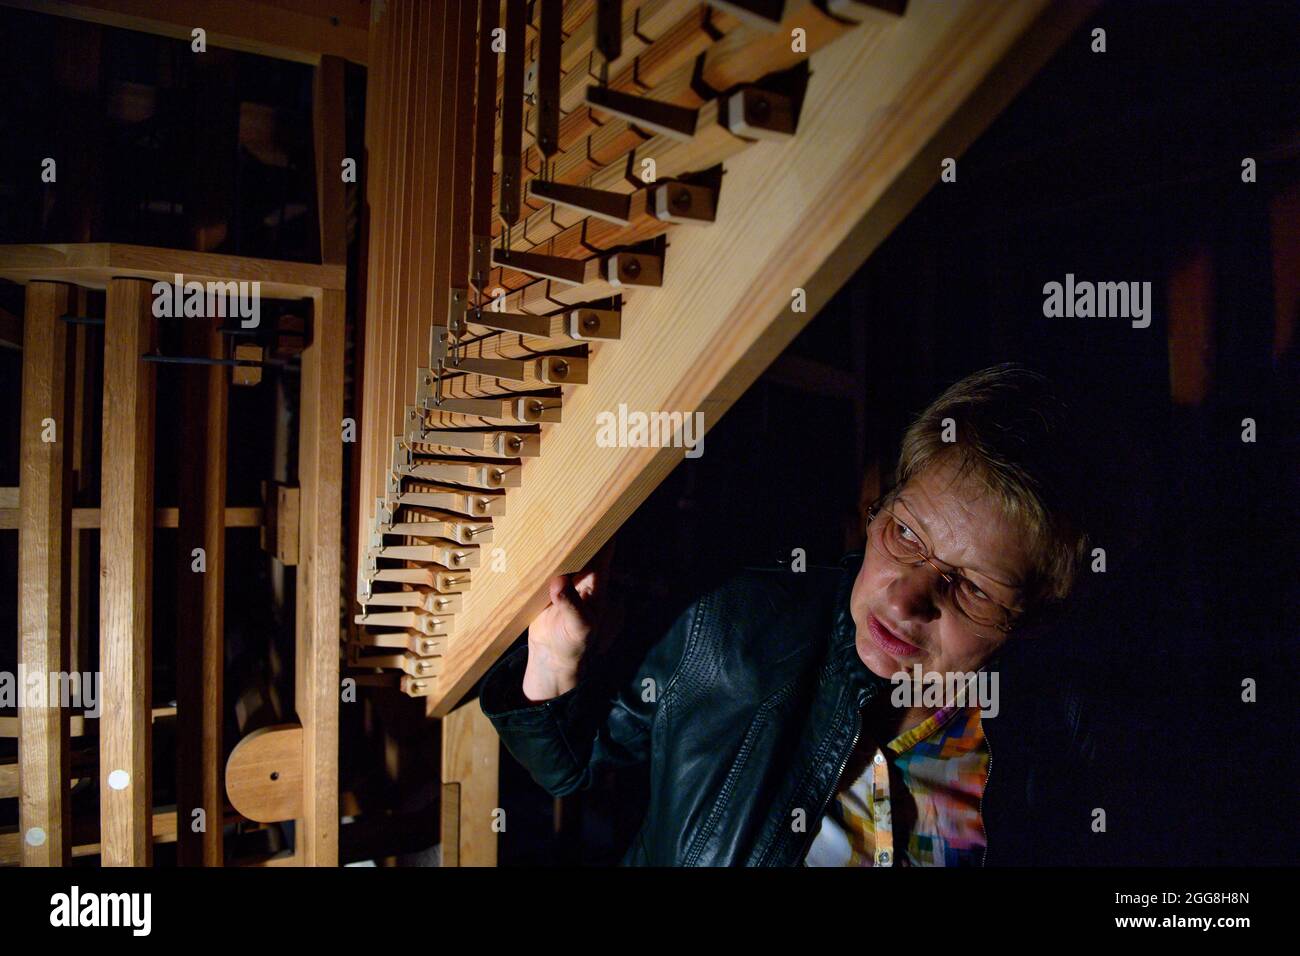 26 August 2021, Saxony-Anhalt, Halberstadt: Carmen Presch, representative for the organ project at the Förderkreis Musik am Dom zu Halberstadt inside the Jesse organ in the Moritzkirche. The organ building company Hüfken had added four stops to the musical instrument. For this purpose, 89 historic pipes were restored and 67 pipes that no longer exist were reconstructed. The new stops will be put into service in a service on 01 September 2021. From 11 to 12 September 2021 the 7th Halberstadt Organ Day will take place. The slider chest organ was completed in 1787 by the Halberstadt master builde Stock Photo